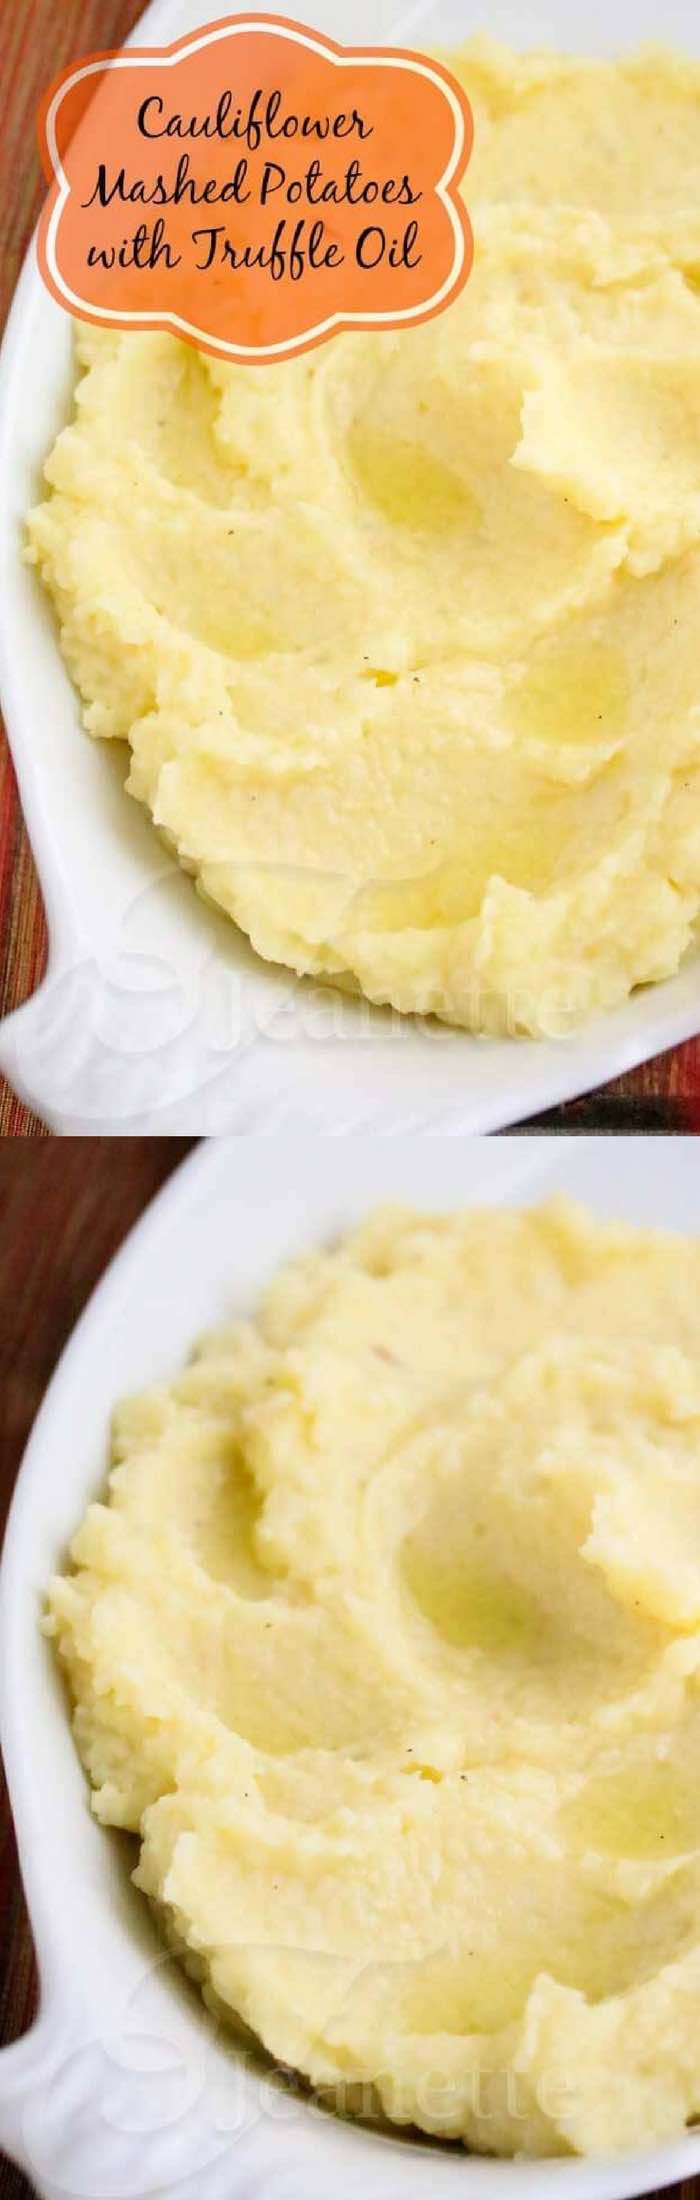 Cauliflower Mashed Potatoes with Truffle Oil - a lower carb option for special occasions